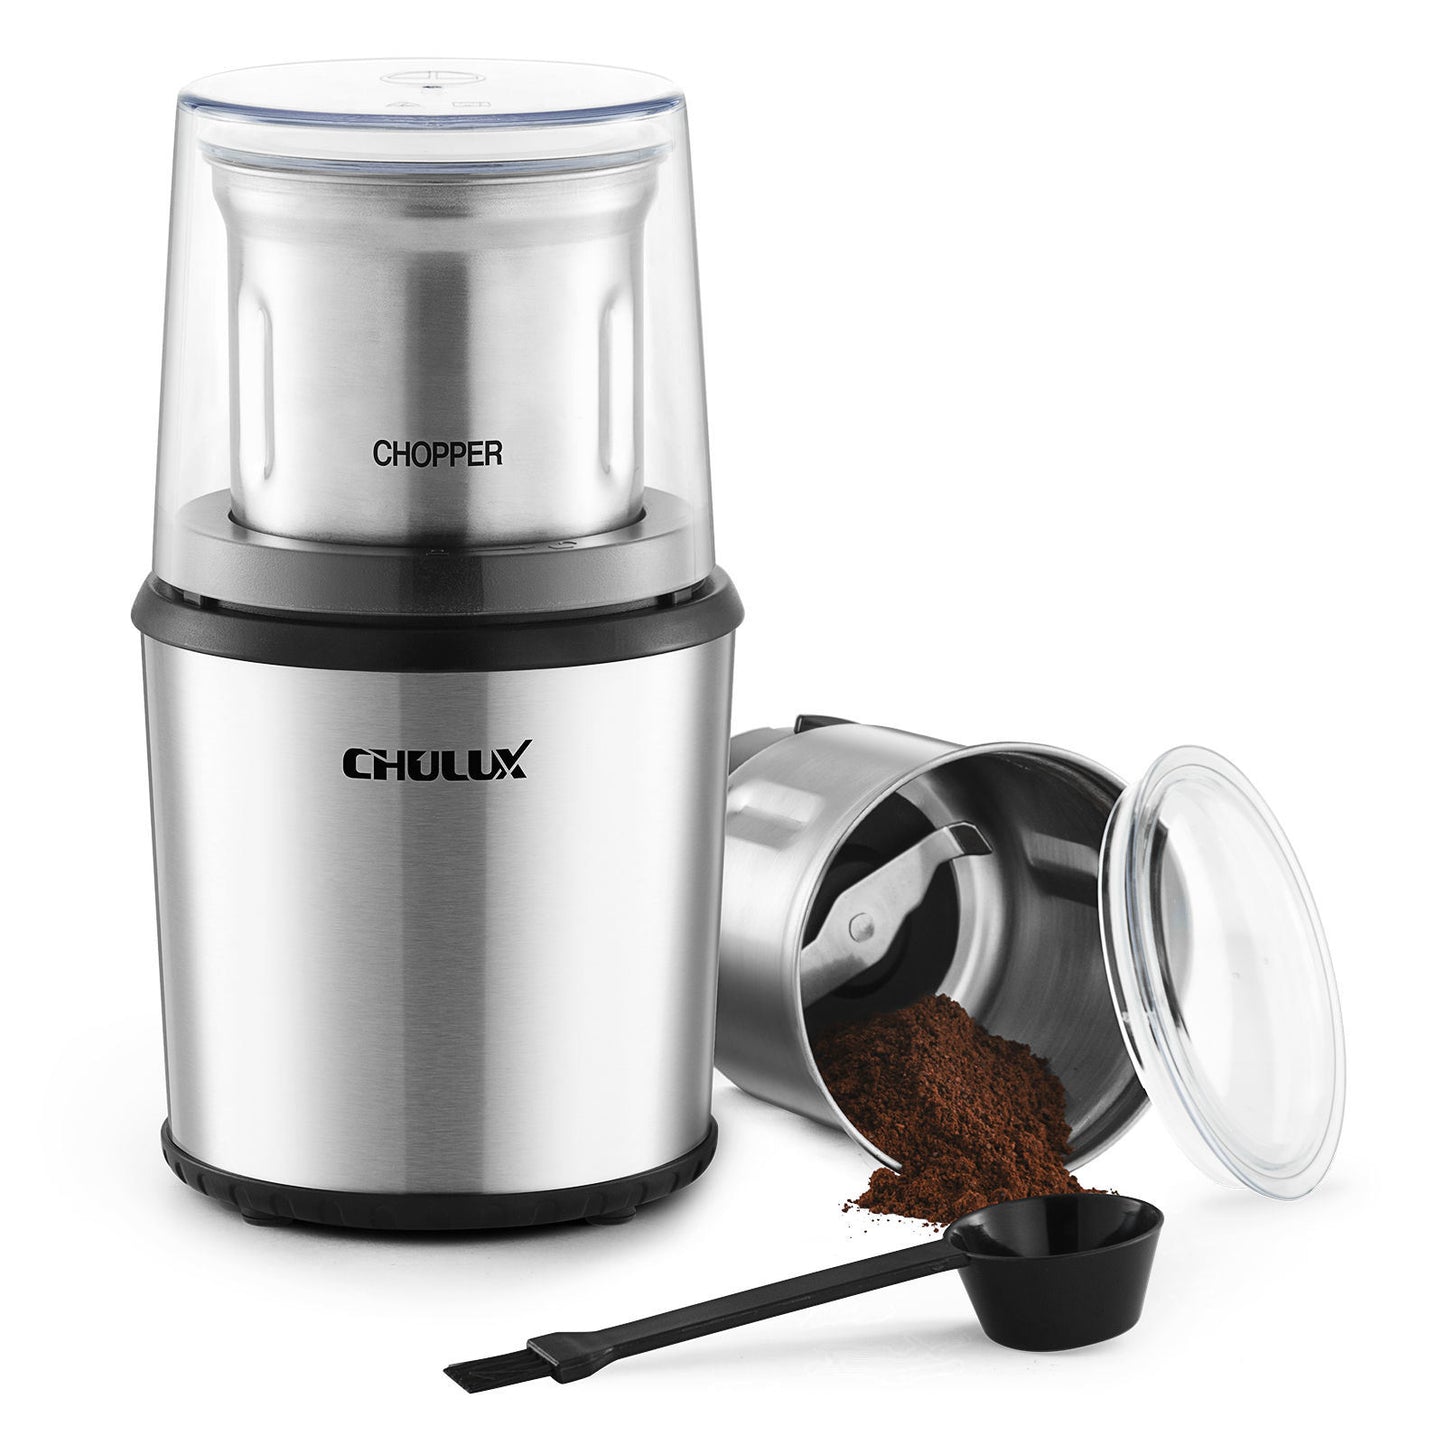 CHULUX Coffee Grinder Electric,Built-In Sharp Blade Spice Grinder